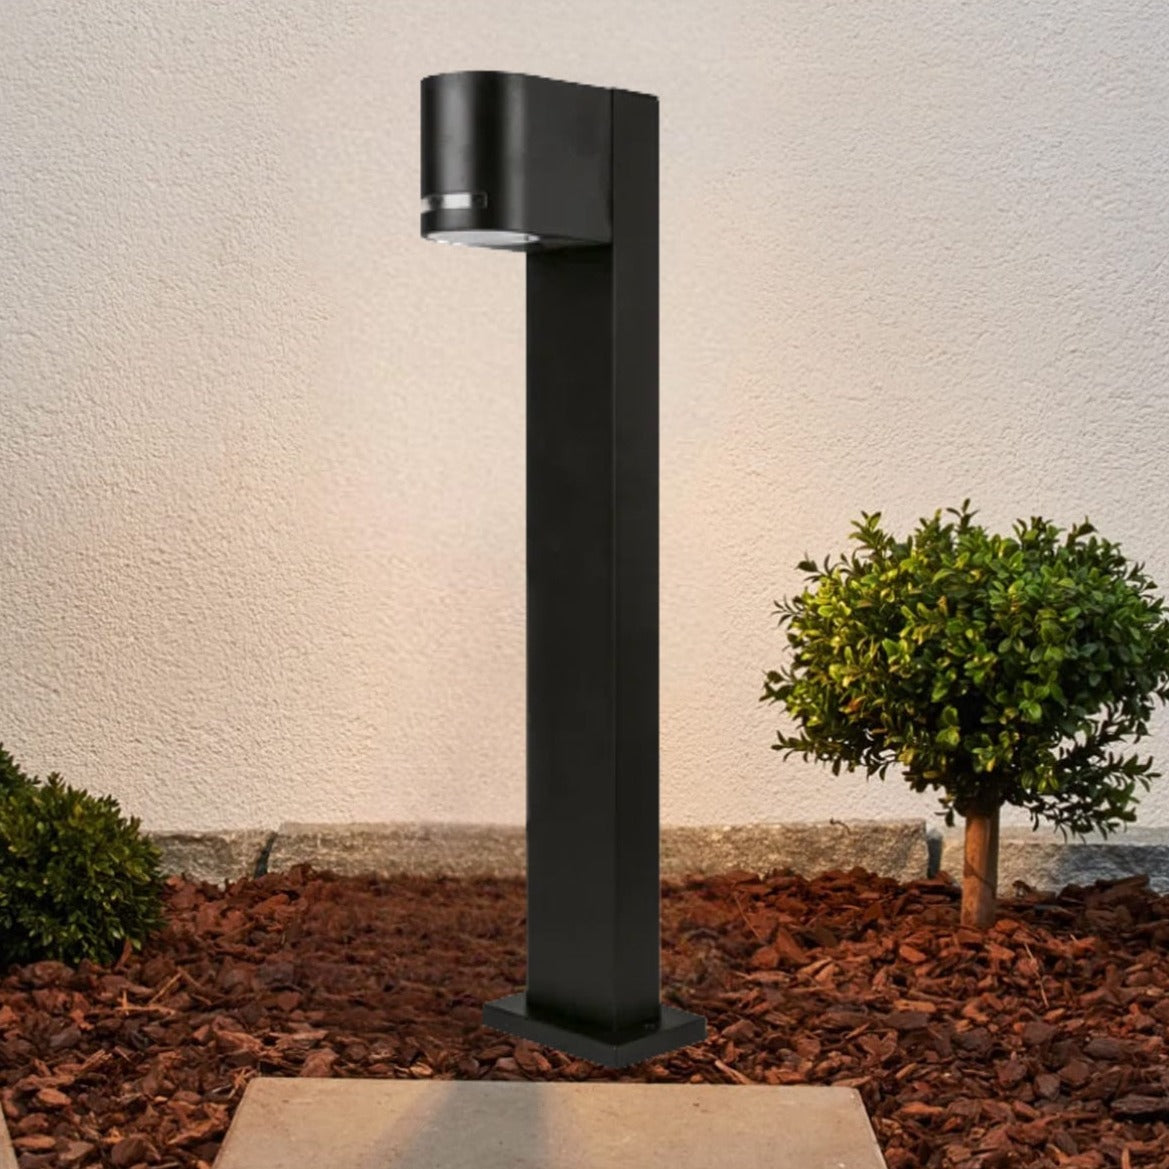 Our Moon bollard creates a beautiful light that illuminates outdoor areas in a pleasant manner. The body of the cylindrical lamp is made of aluminium. When thinking of suitable usage locations driveways, paths and doorways come to mind.  The amorphous diffuser ensures uniform light distribution, creating a comfortable atmosphere.